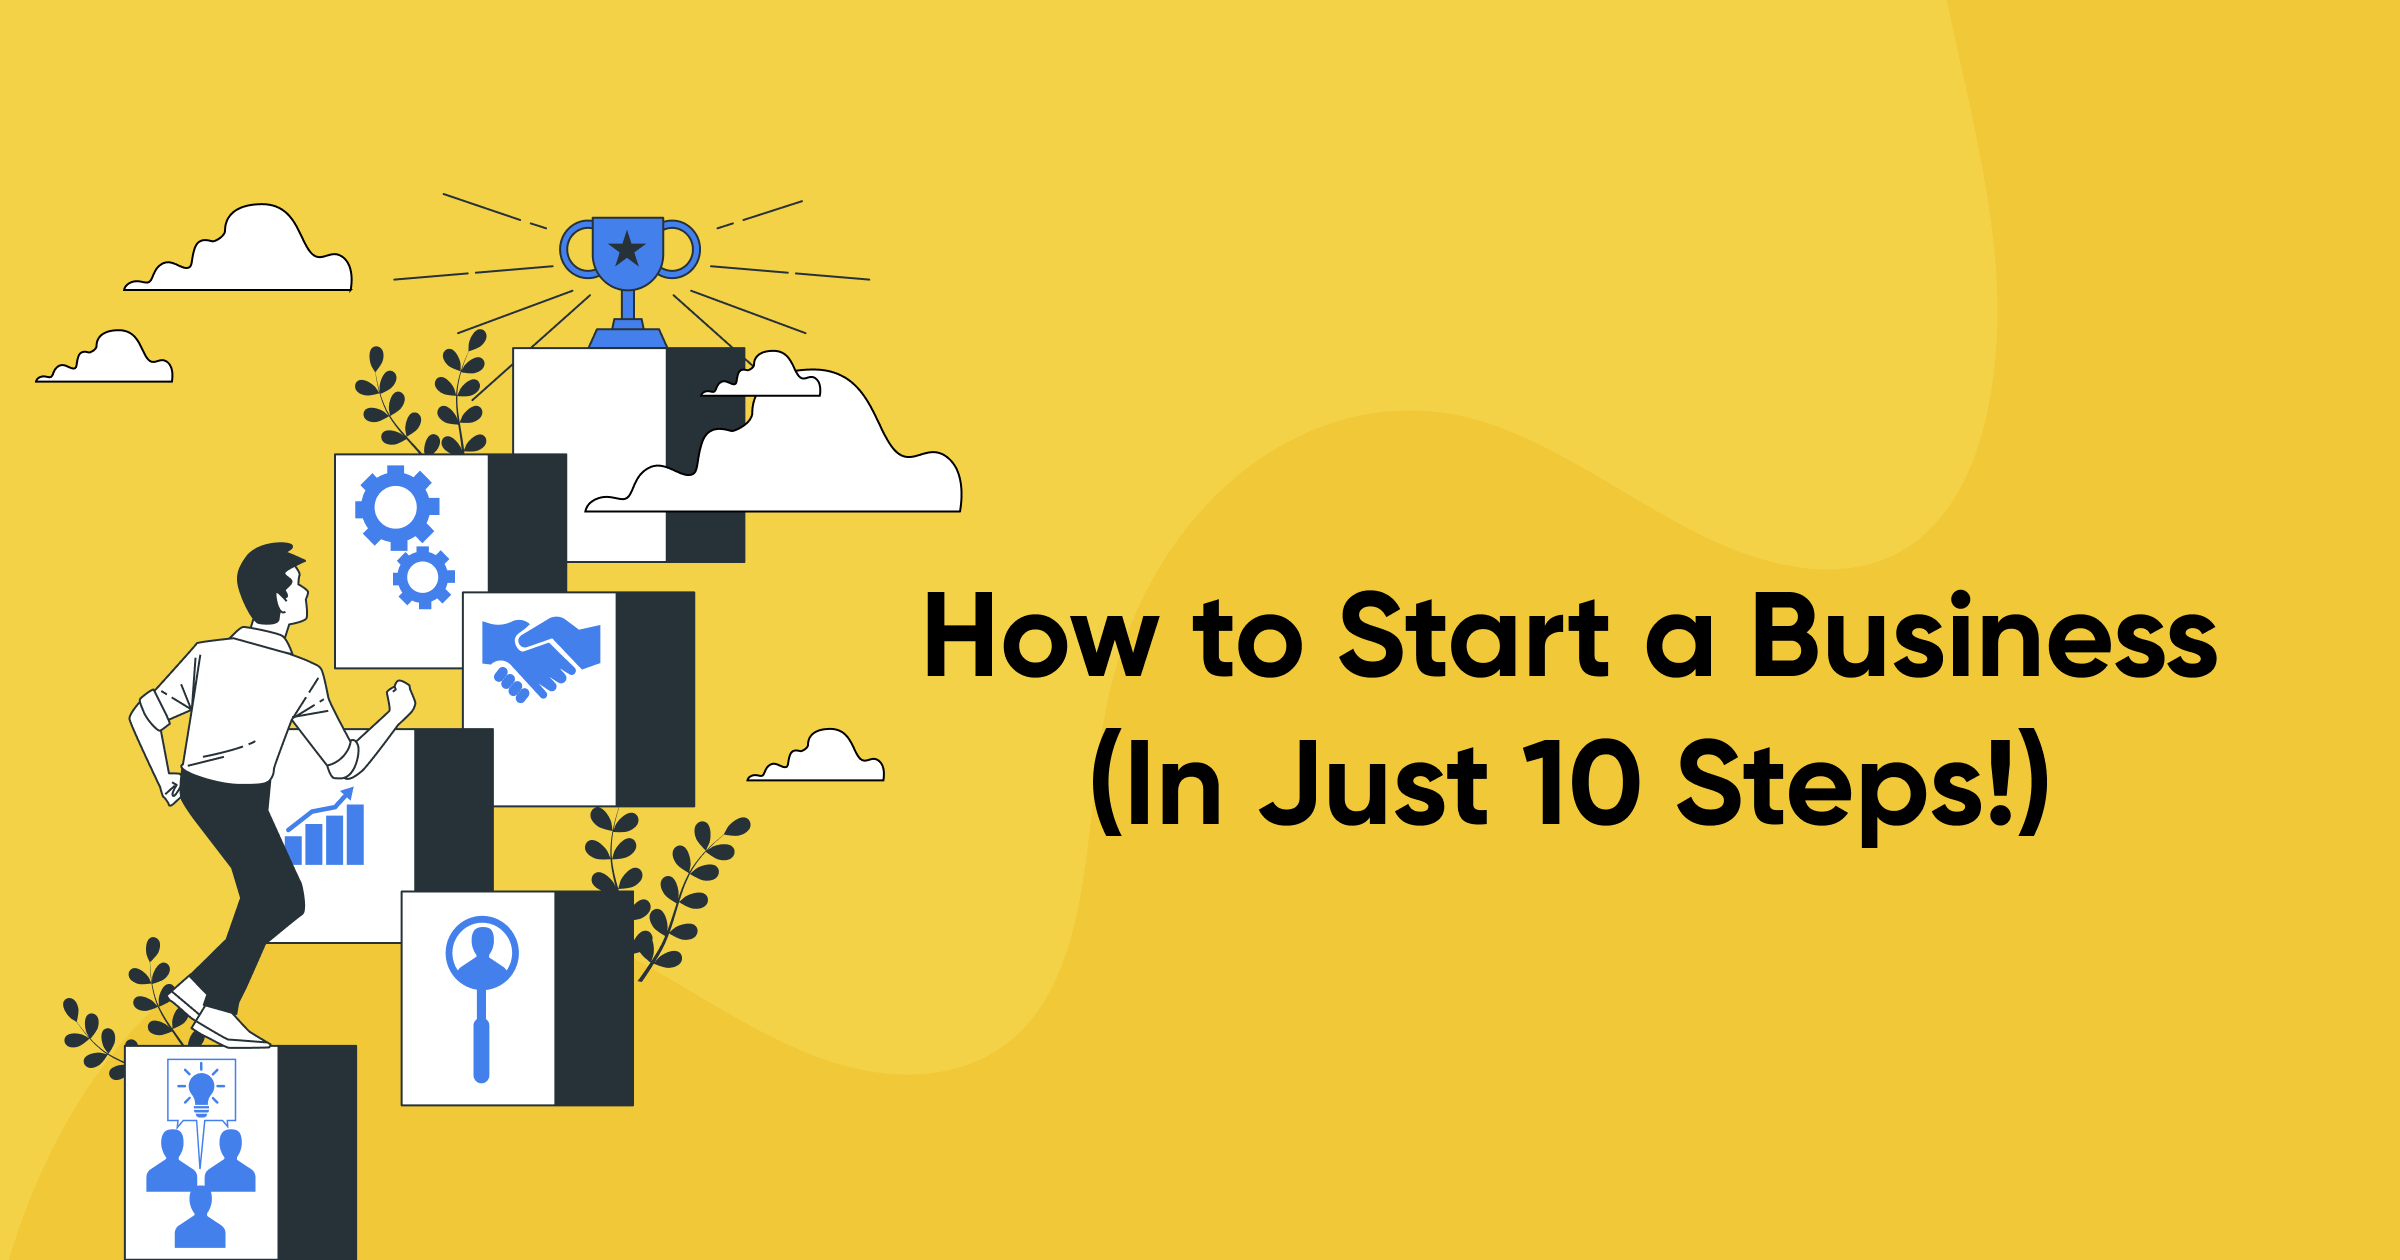 How to Start a Business (In Just 10 Steps!)